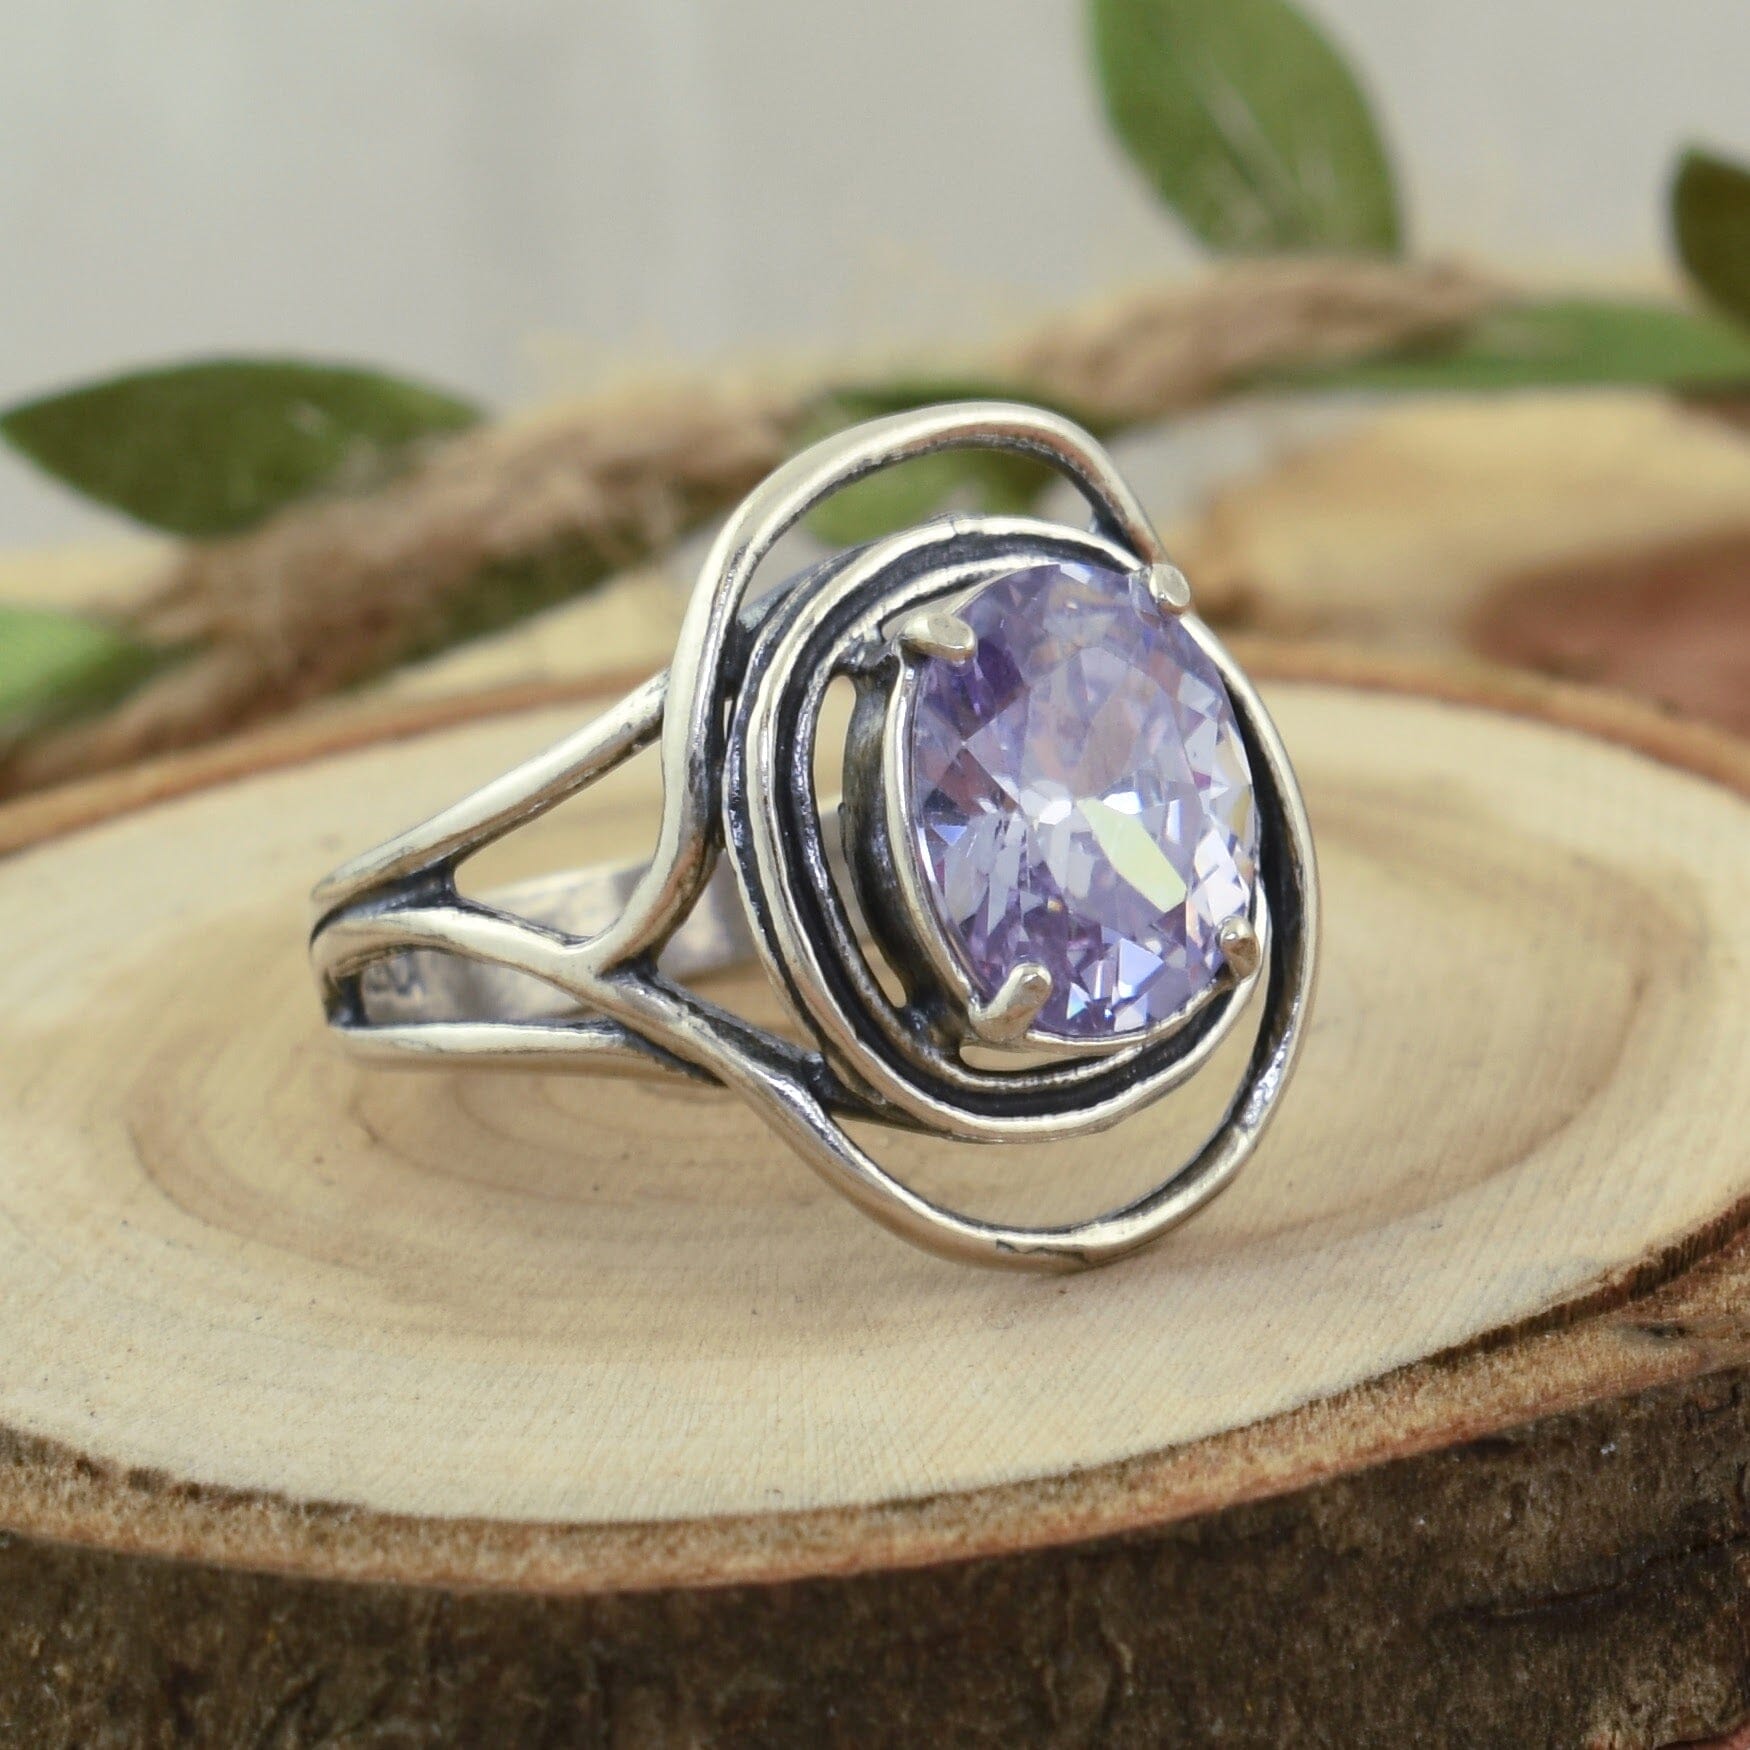 Lavender oval stone ring set in sterling silver